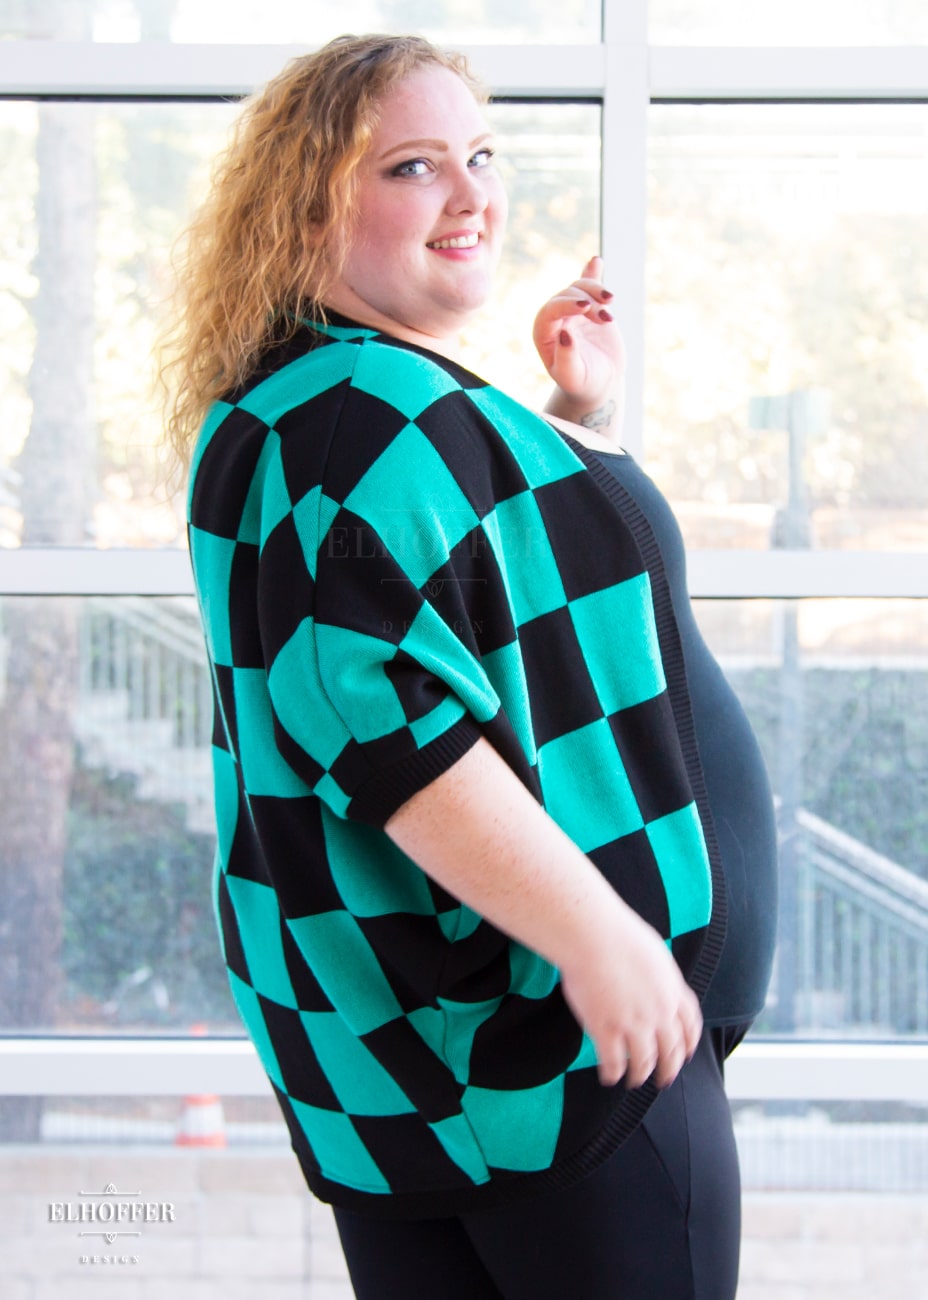 A side view of Bee, a fair skinned 3xl model with shoulder length curly blonde hair, wearing a XL-3XL sample of a shrug with a black and green chessboard pattern. The shrug featured 3/4 sleeves and black ribbing along edges and cuffs.